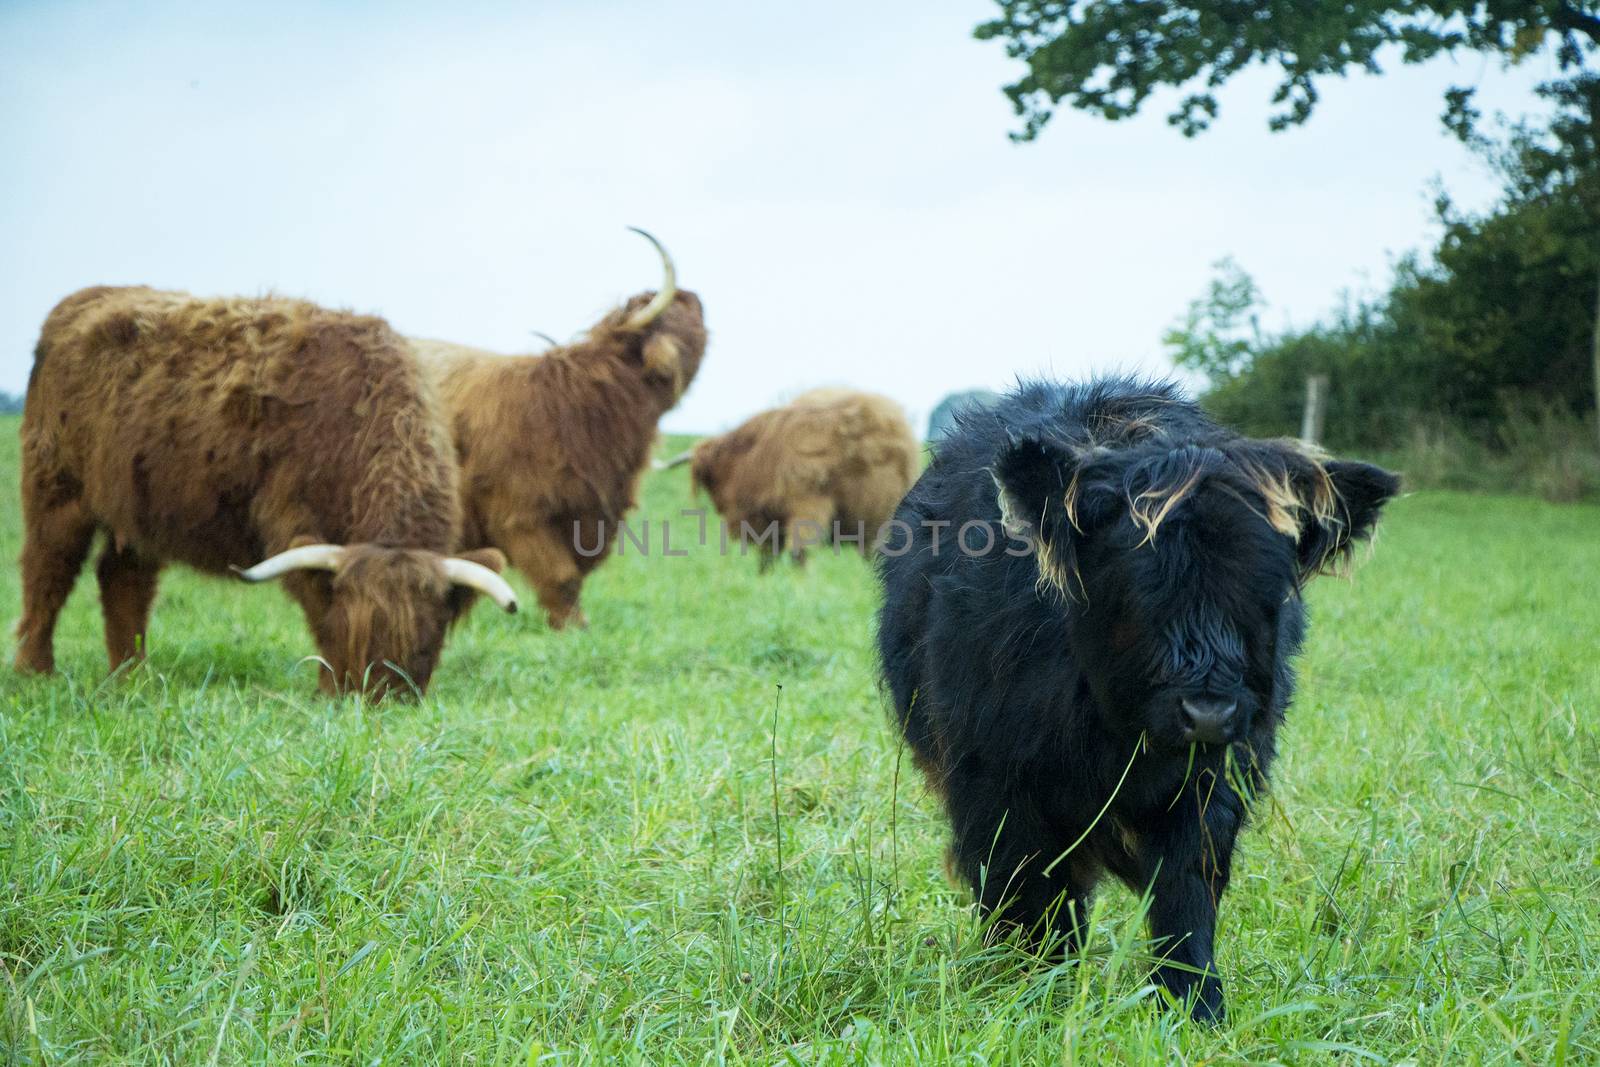 Scottish highland cows on grass field on a cloudy day.